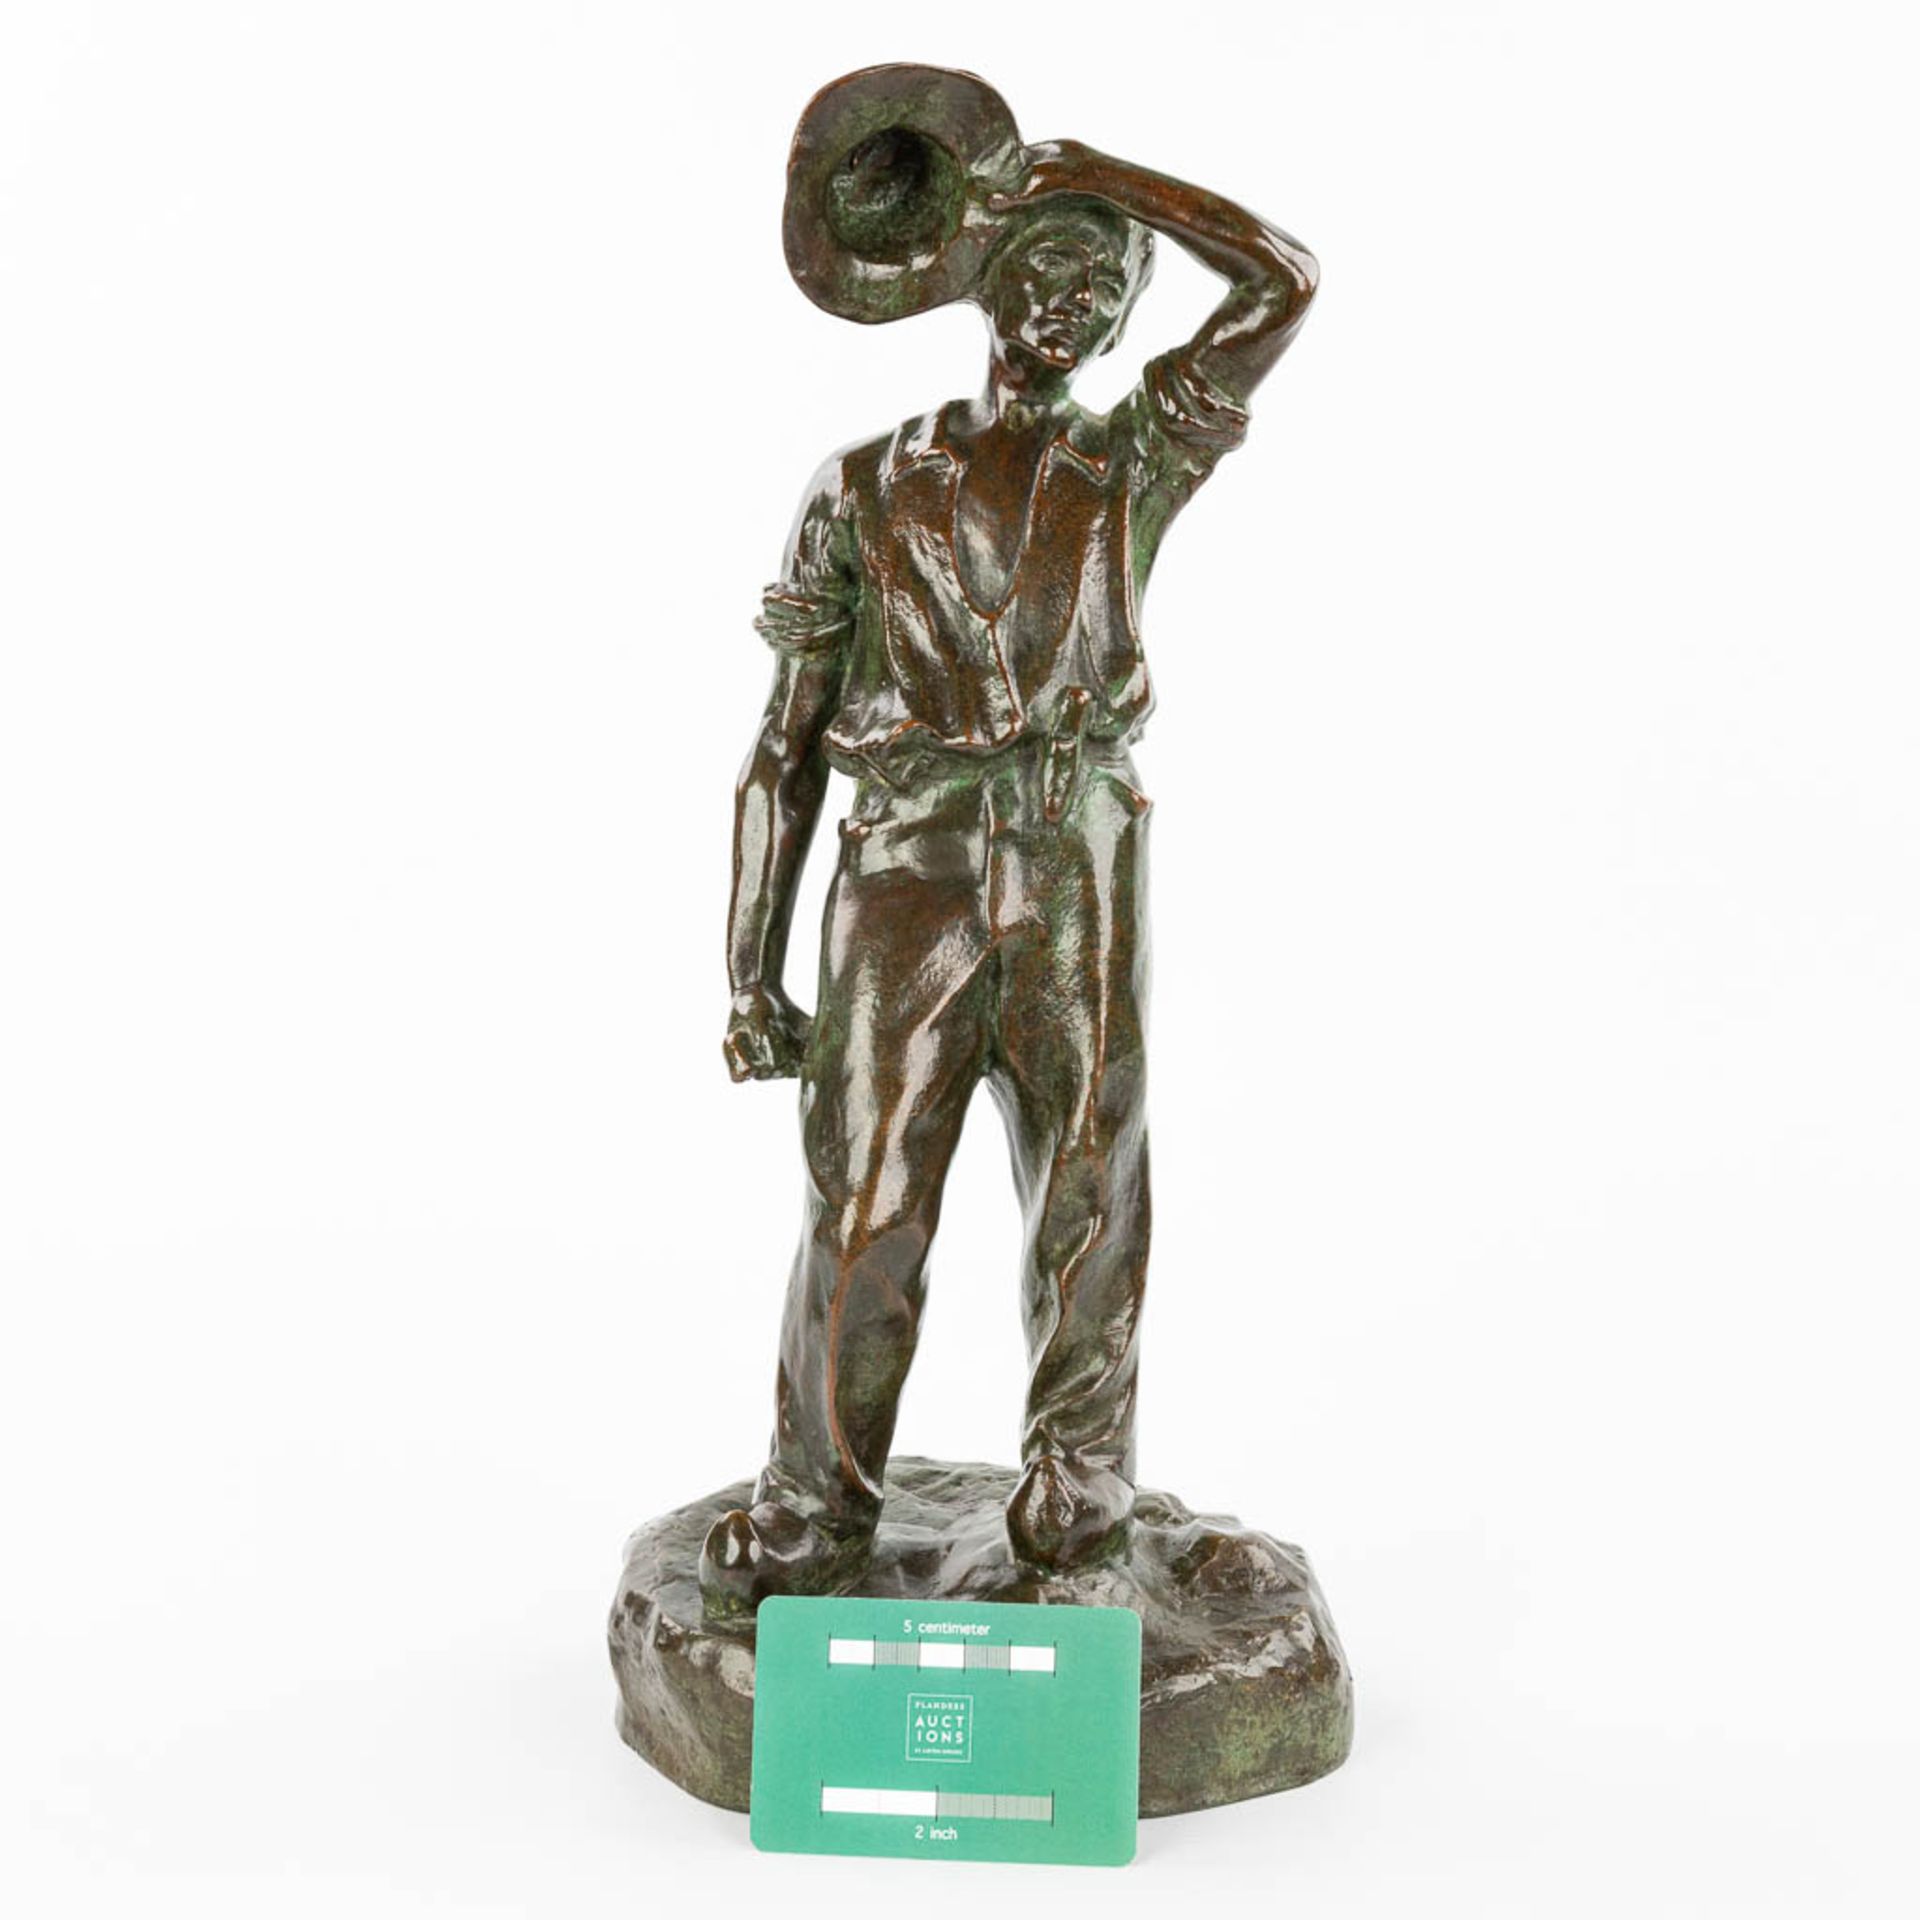 Arthur PUYT (1873-1955) 'Man with the hat', patinated bronze. (H:40cm) - Image 4 of 10